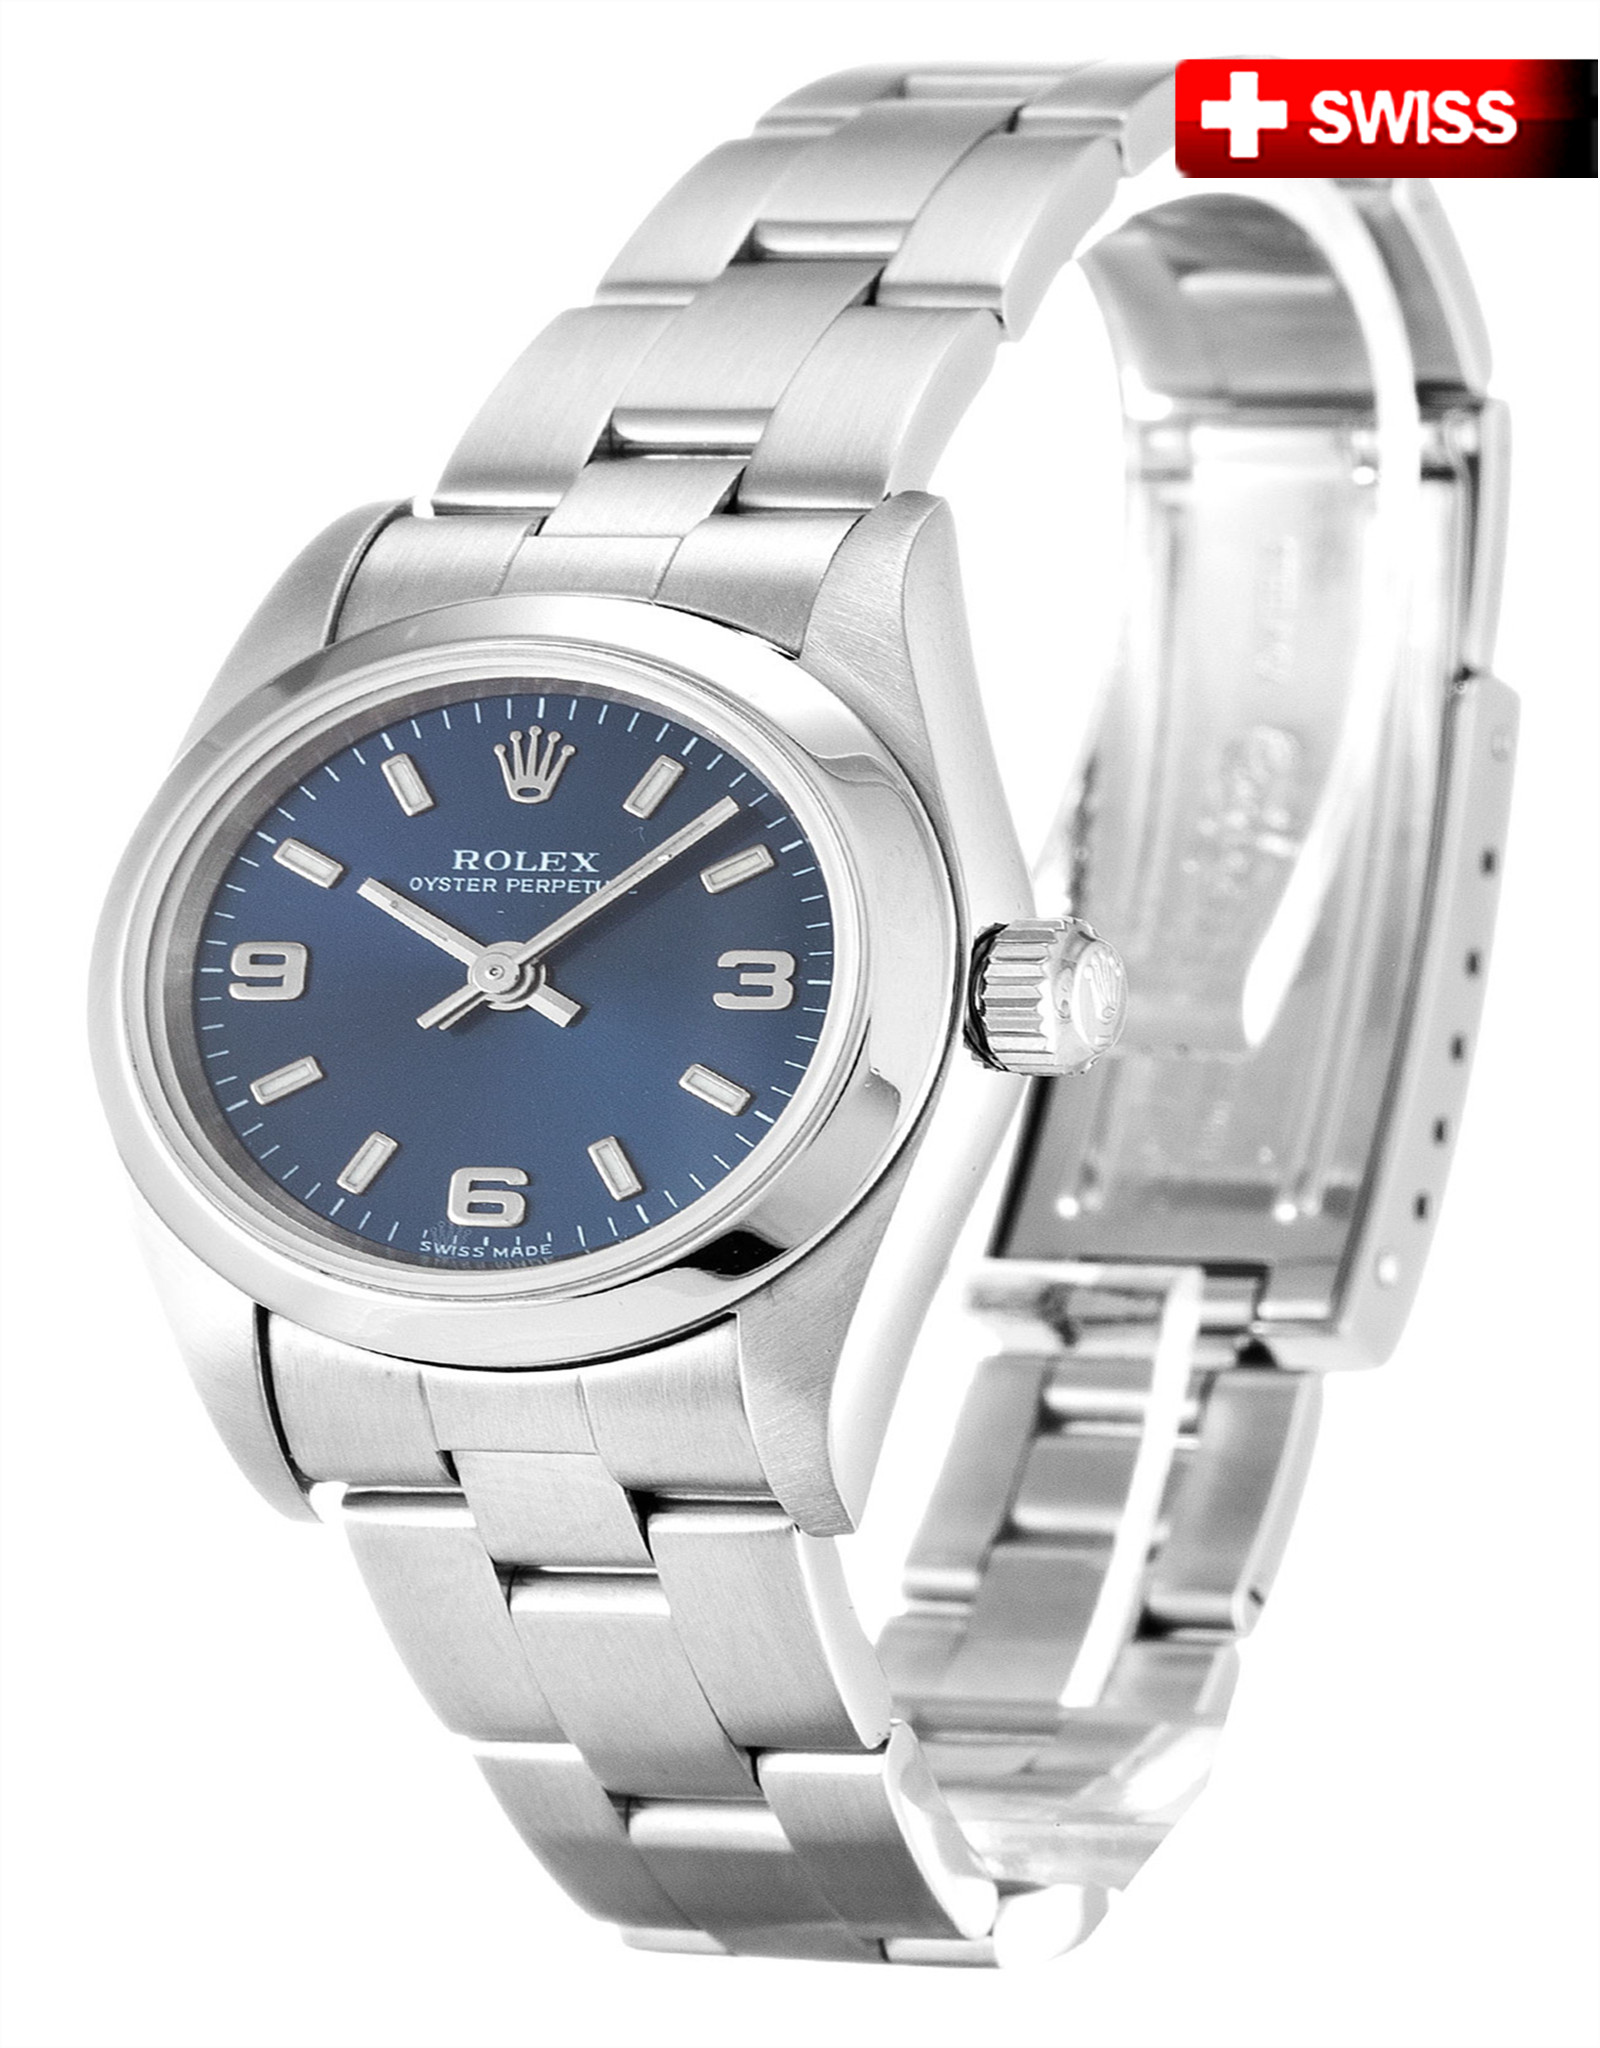 Réplica suiza Rolex Mujeres Oyster Perpetual 76080 24MM